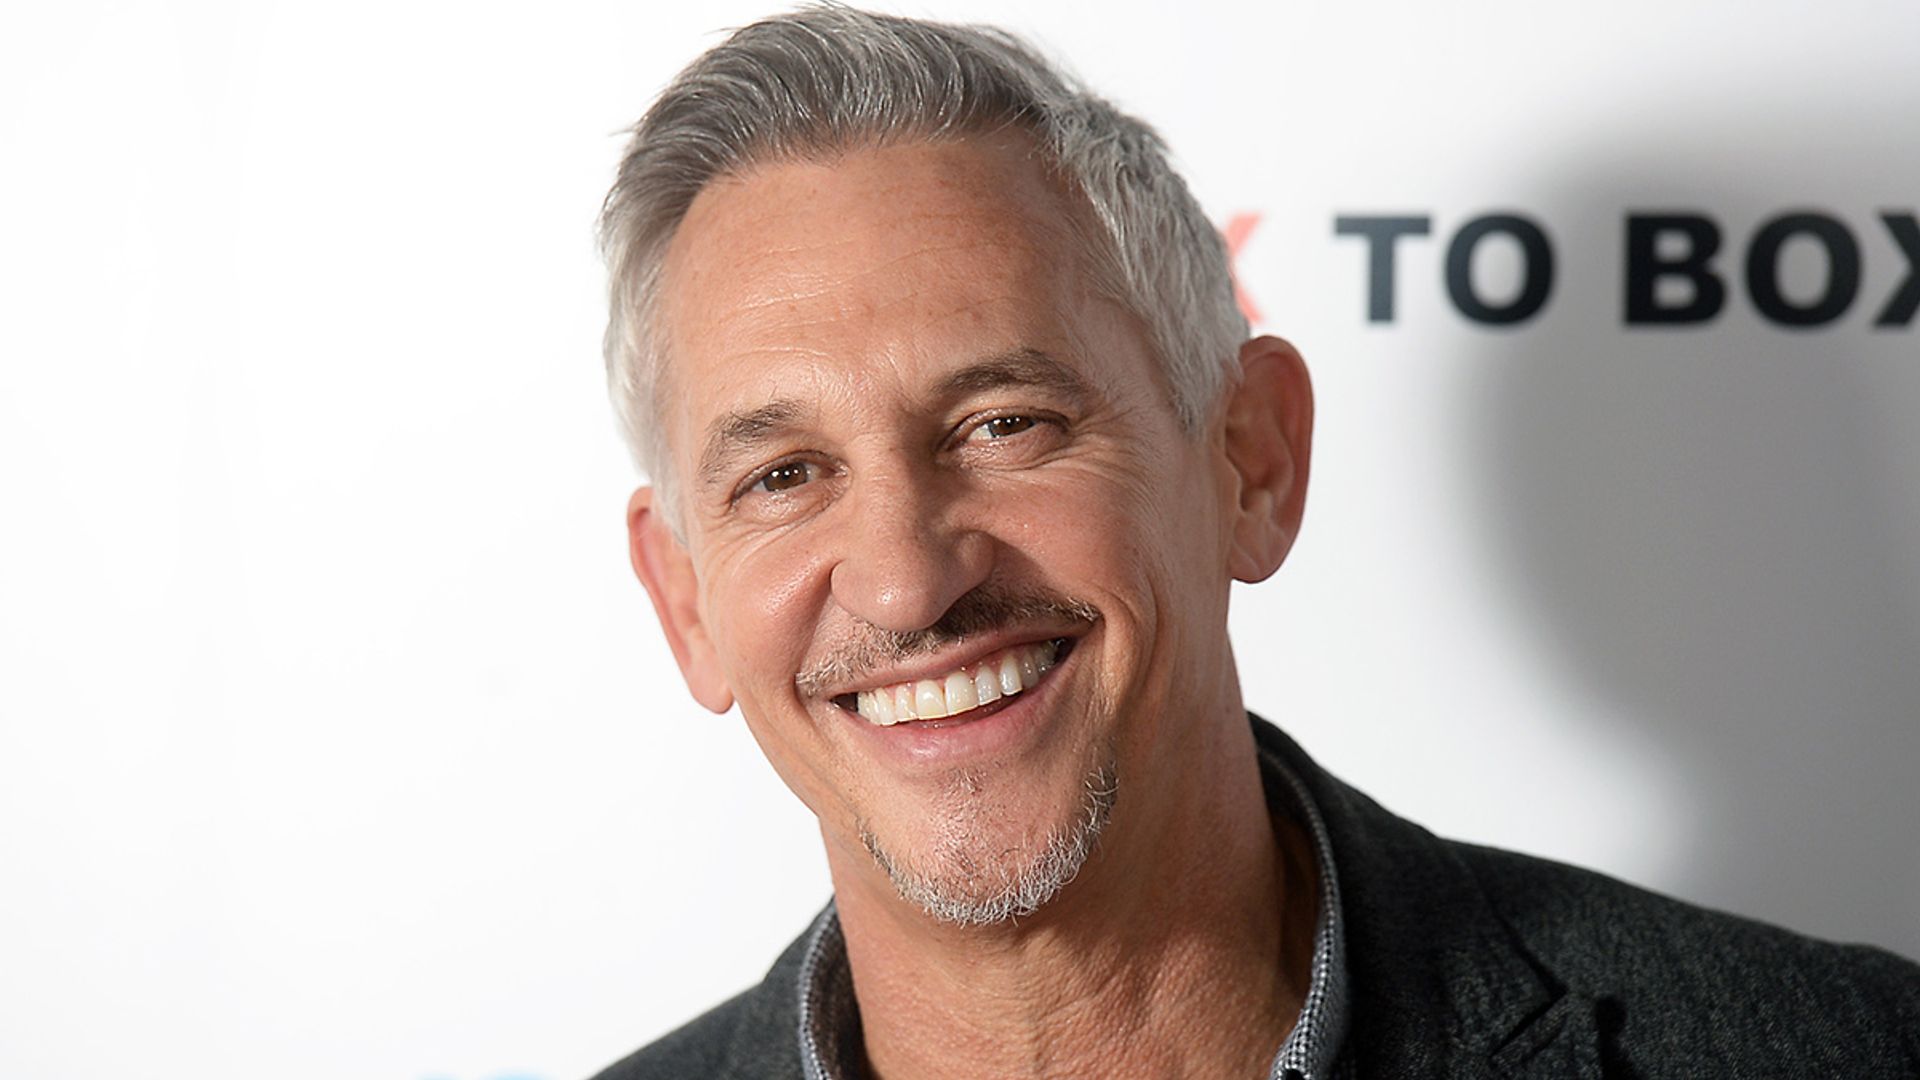 Gary Lineker's sons surprise him with hilariously appropriate 60th birthday cake